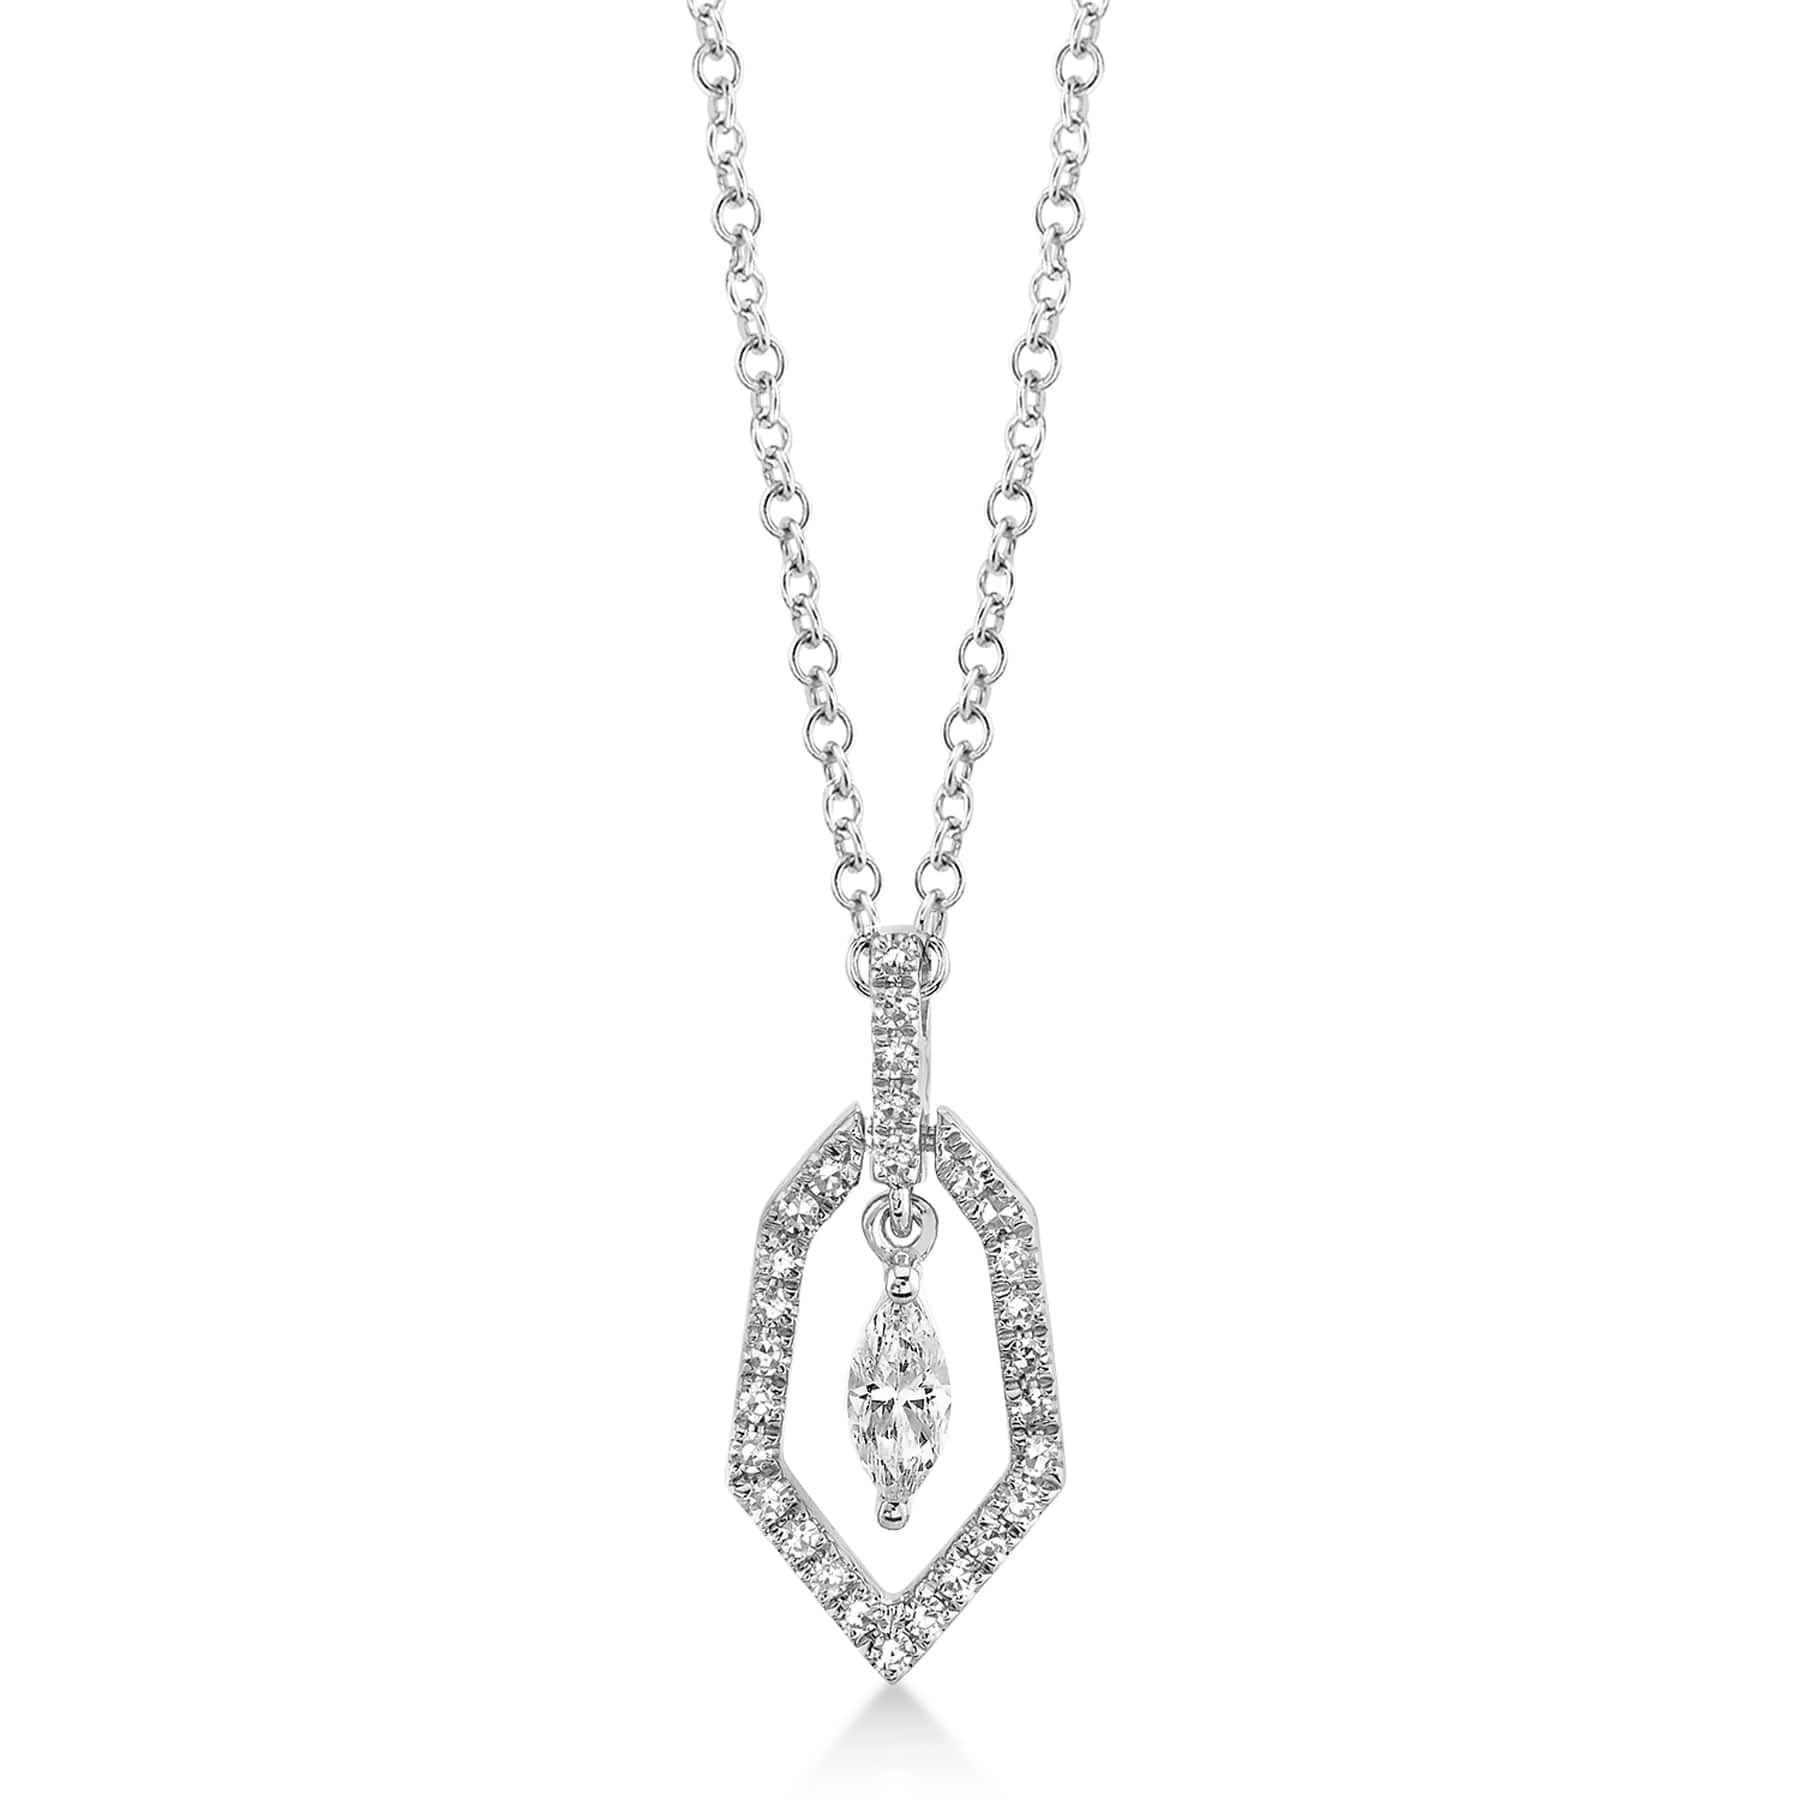 Diamond Marquise Dangling Pendant Necklace 14k White Gold (0.17ct)